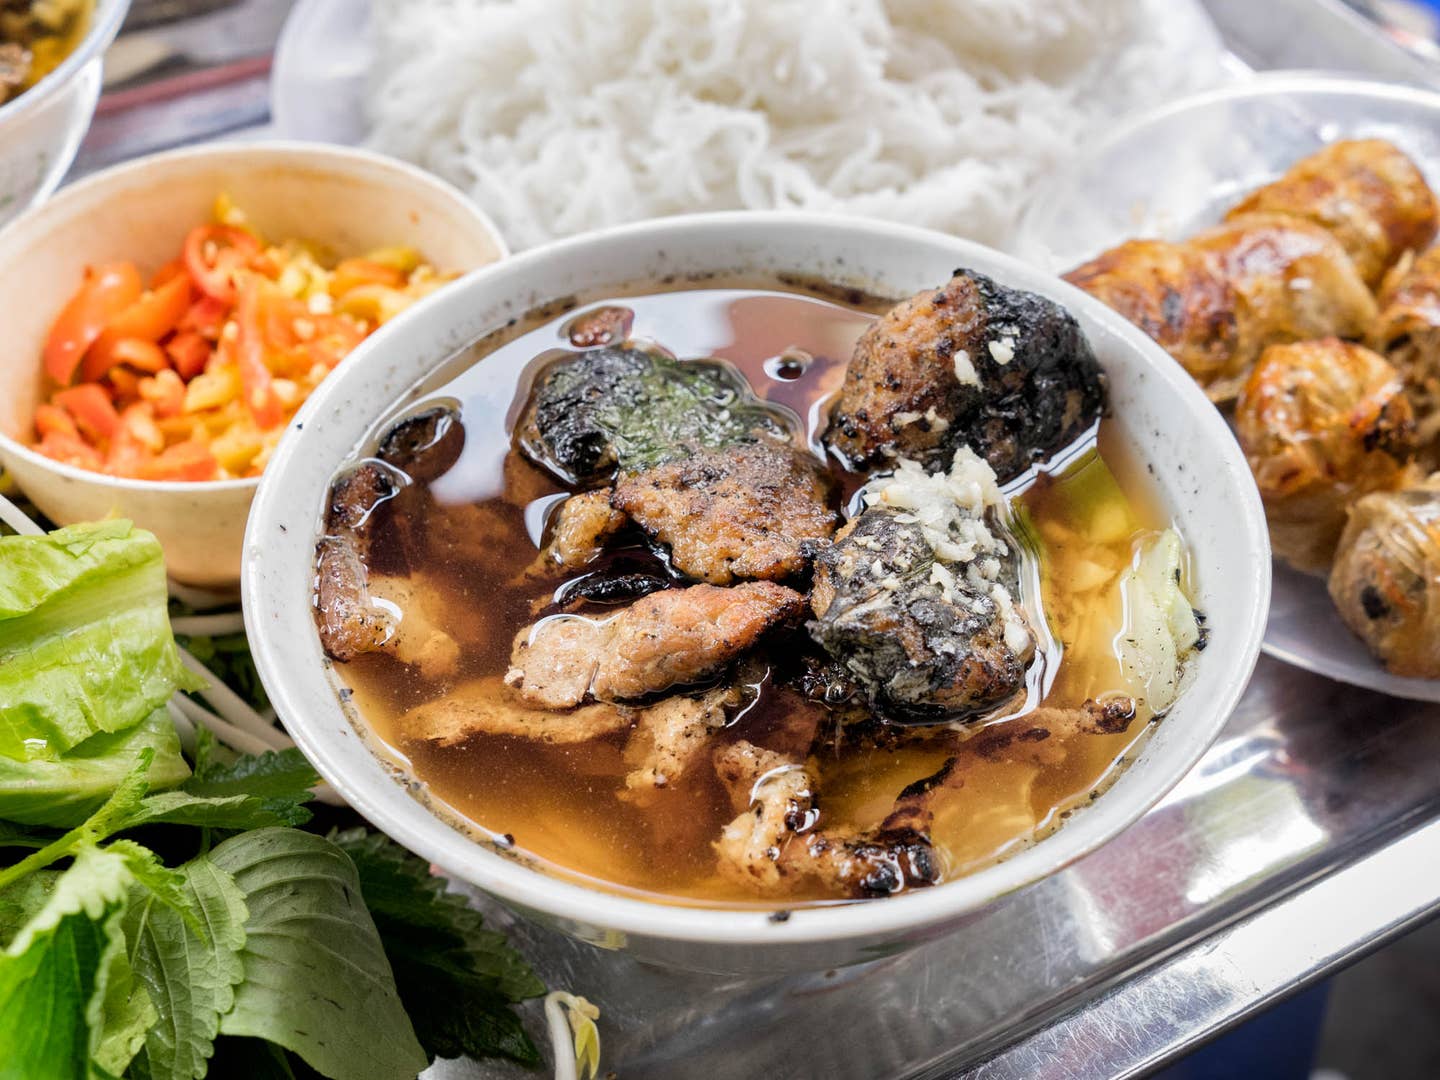 Why Does Vietnam Have a Mid-Day Siesta? I Blame the Bun Cha